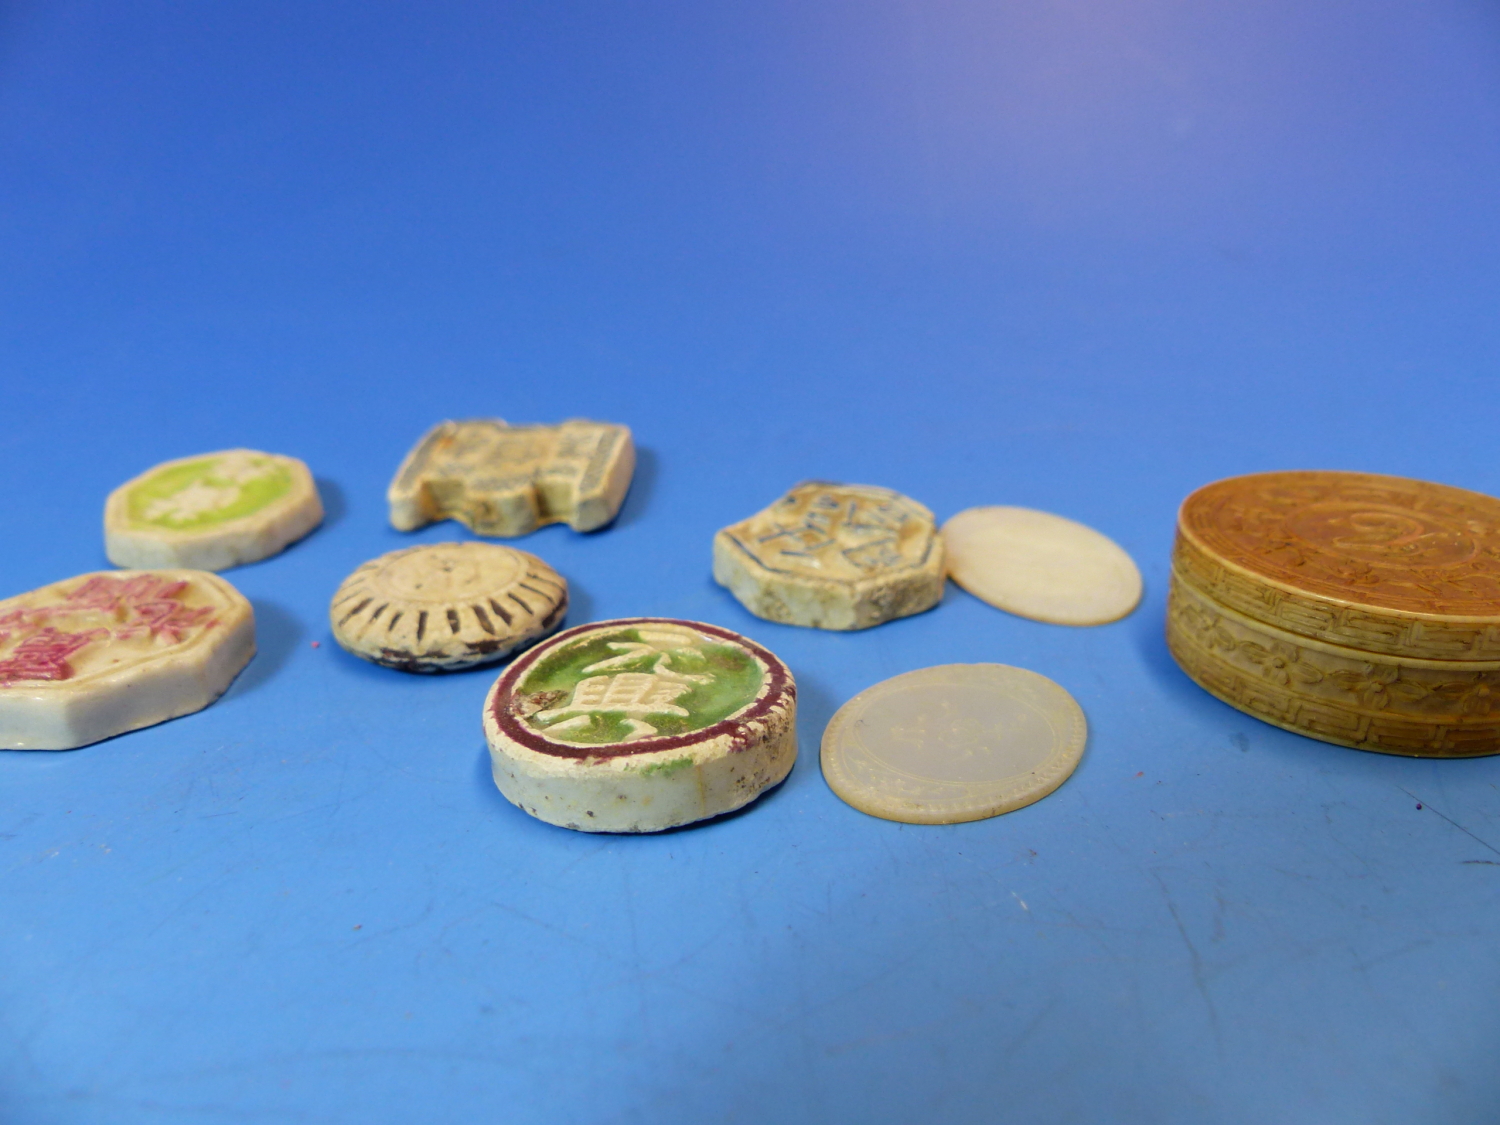 SIX CHINESE PORCELAIN GAMBLING TOKENS TOGETHER WITH MOTHER OF PEARL COUNTERS INITIALLED C, SOME - Image 5 of 10